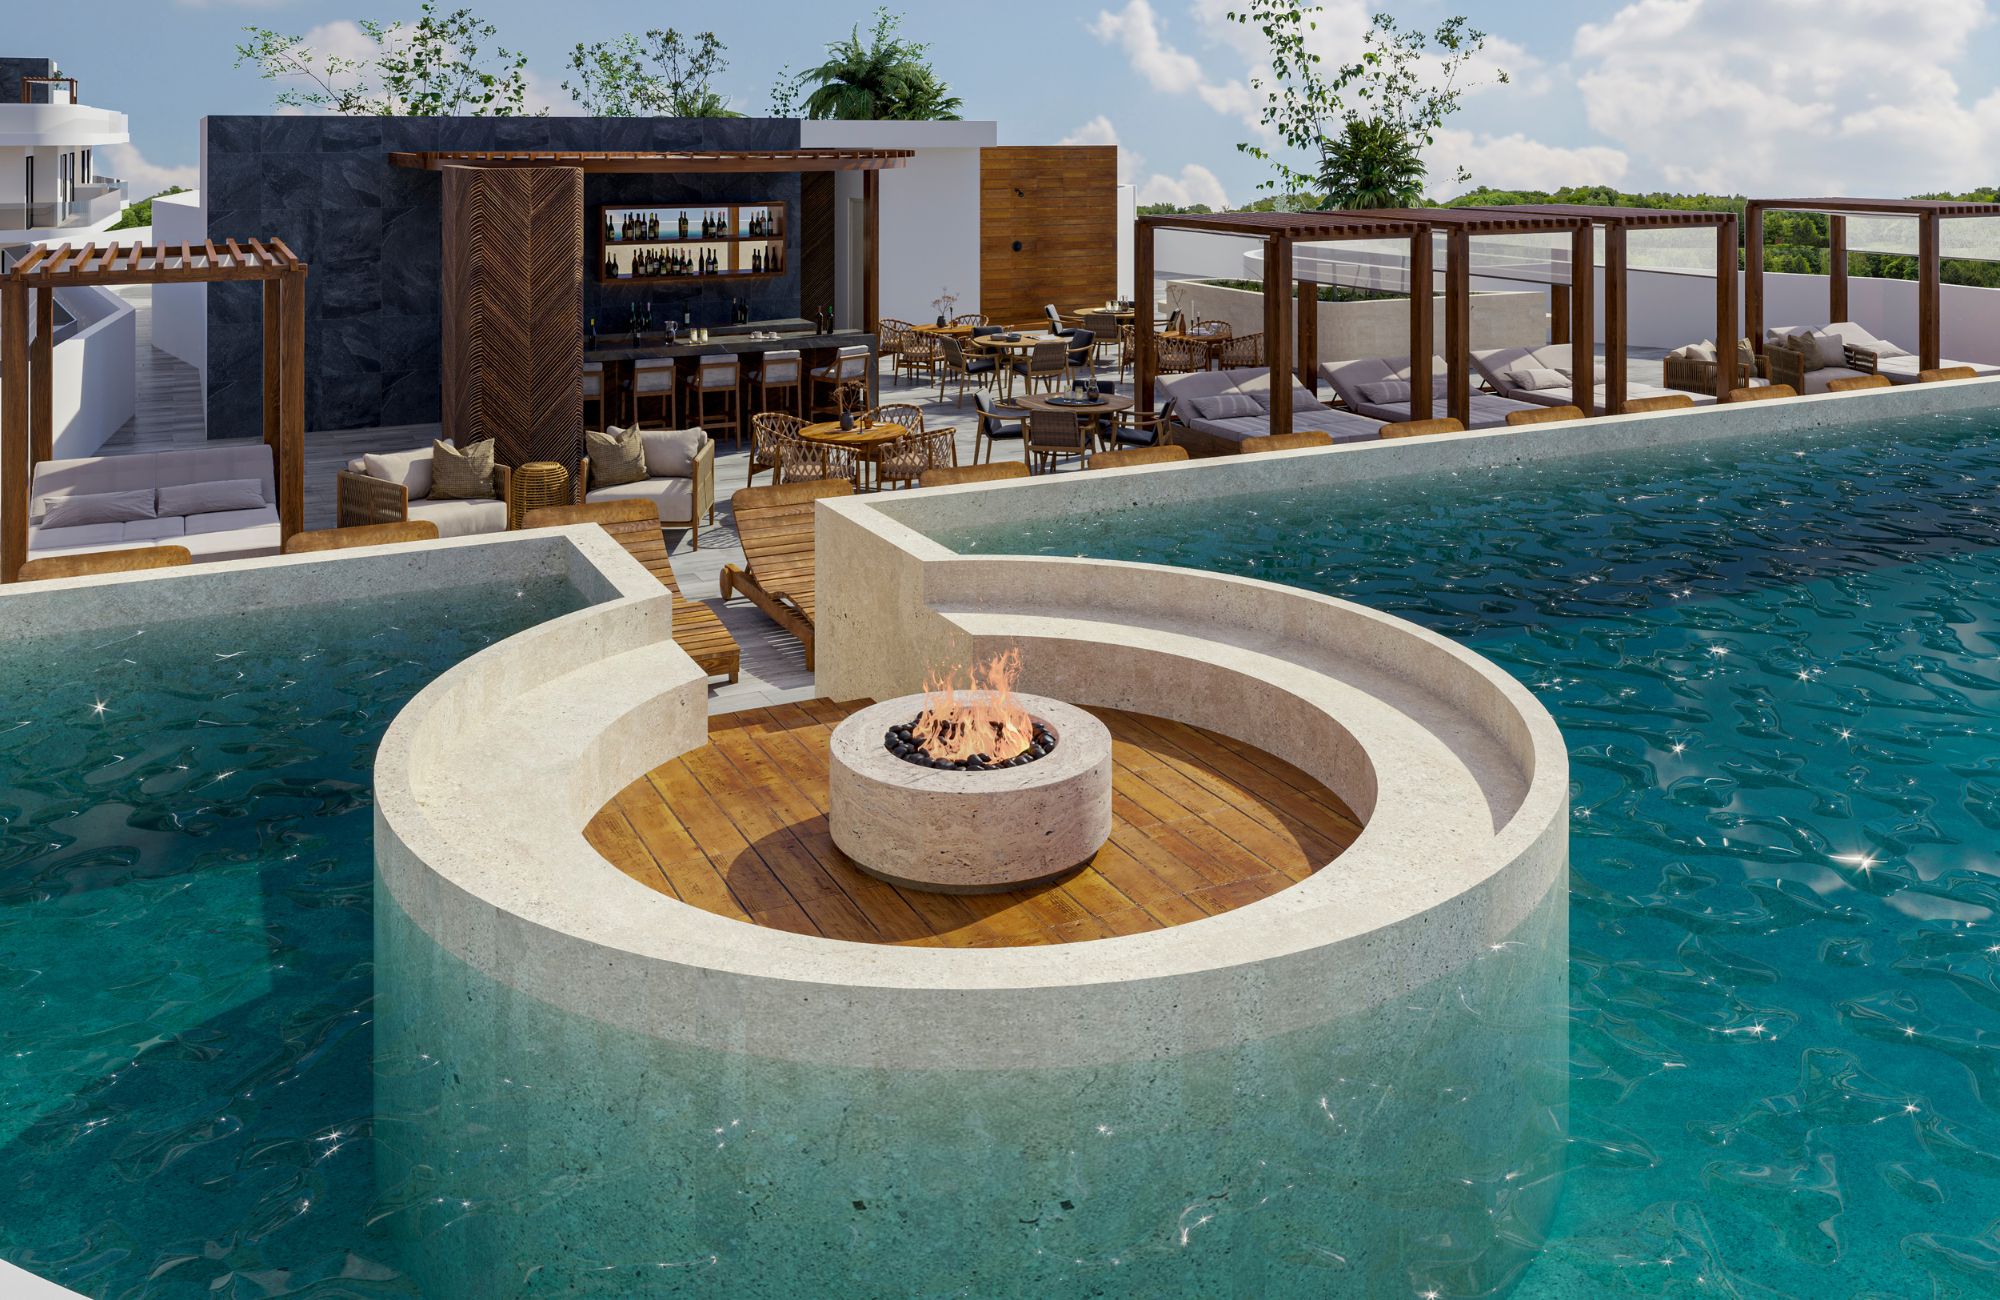 Condo with panoramic view, infinity pool, jacuzzi, snack bar, pre-construction, in Puerto Cancun